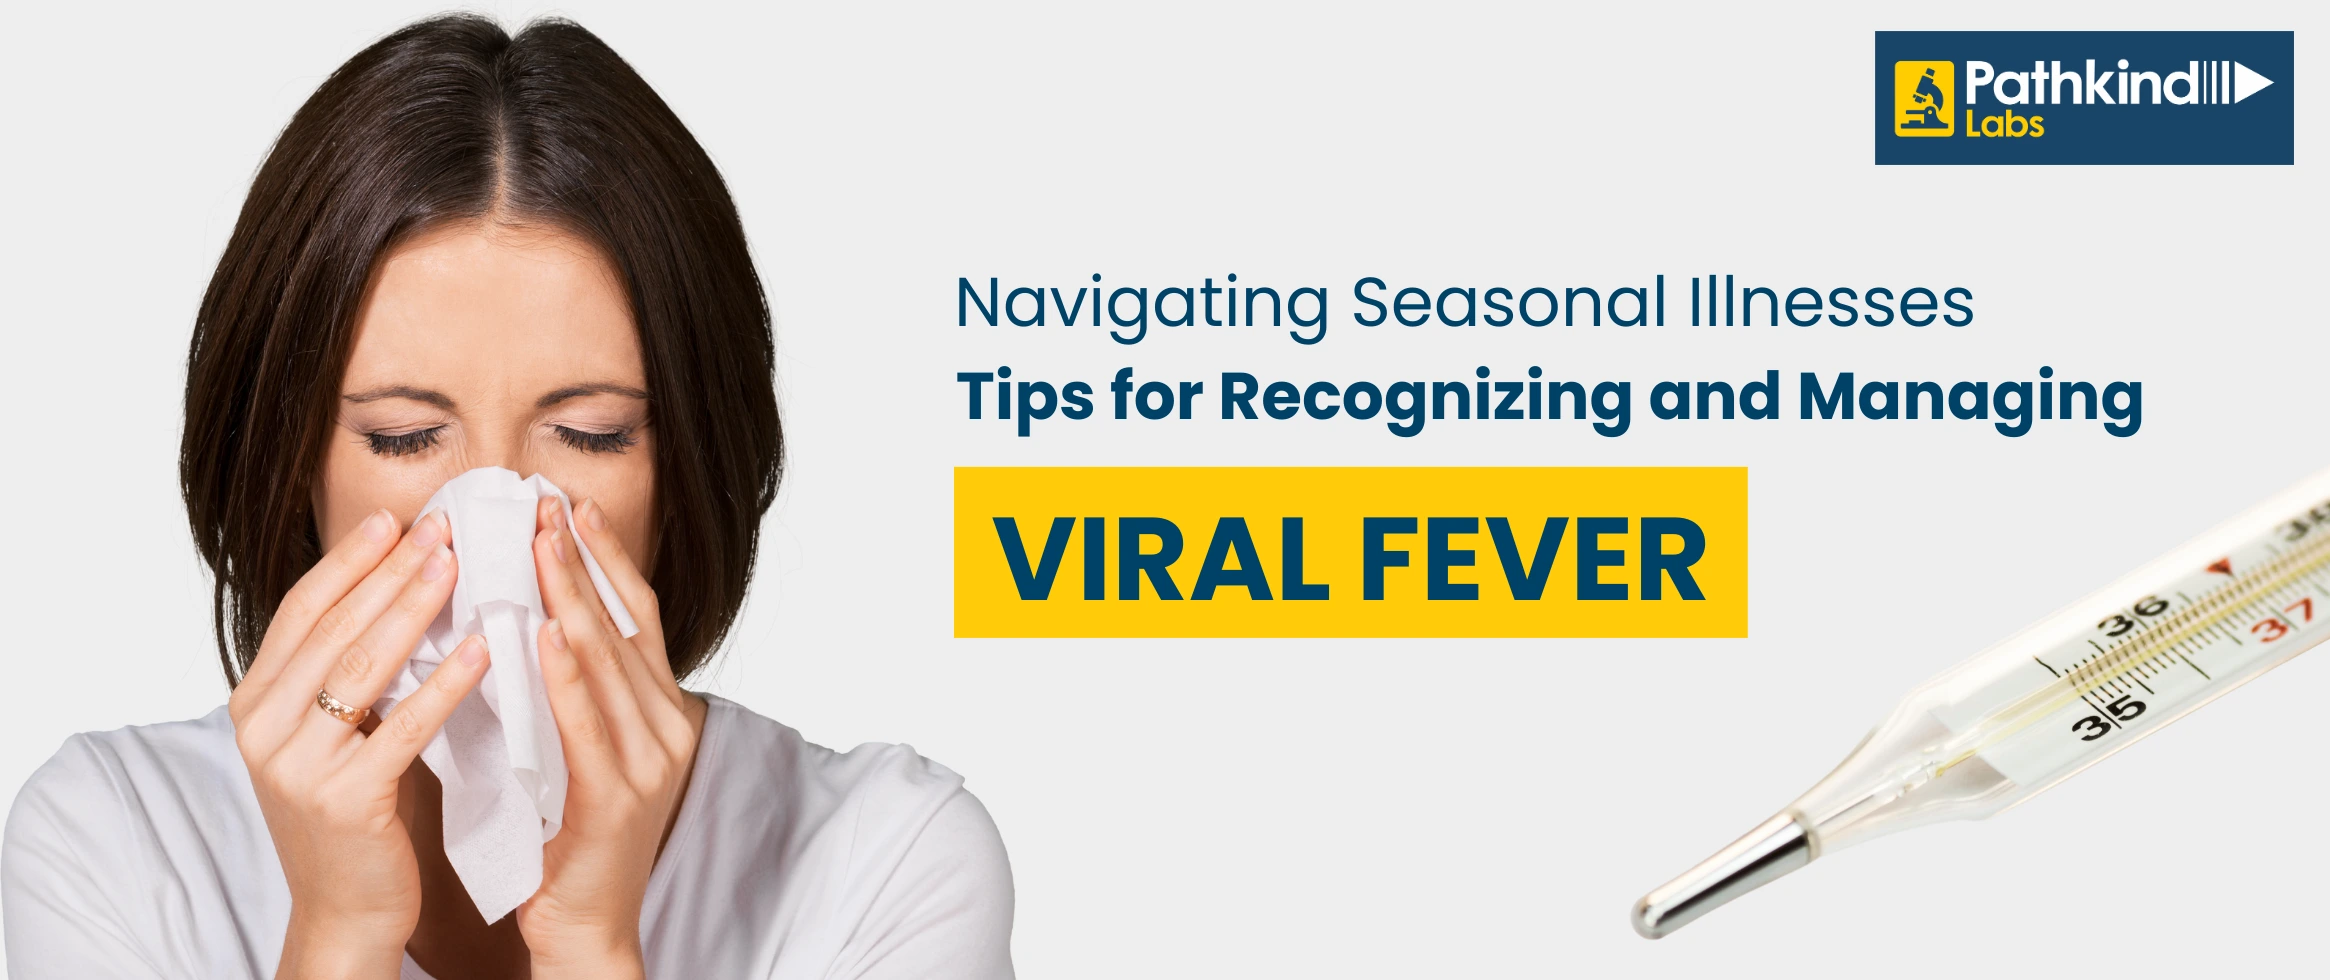 Tips for Recognizing and Managing Viral Fever